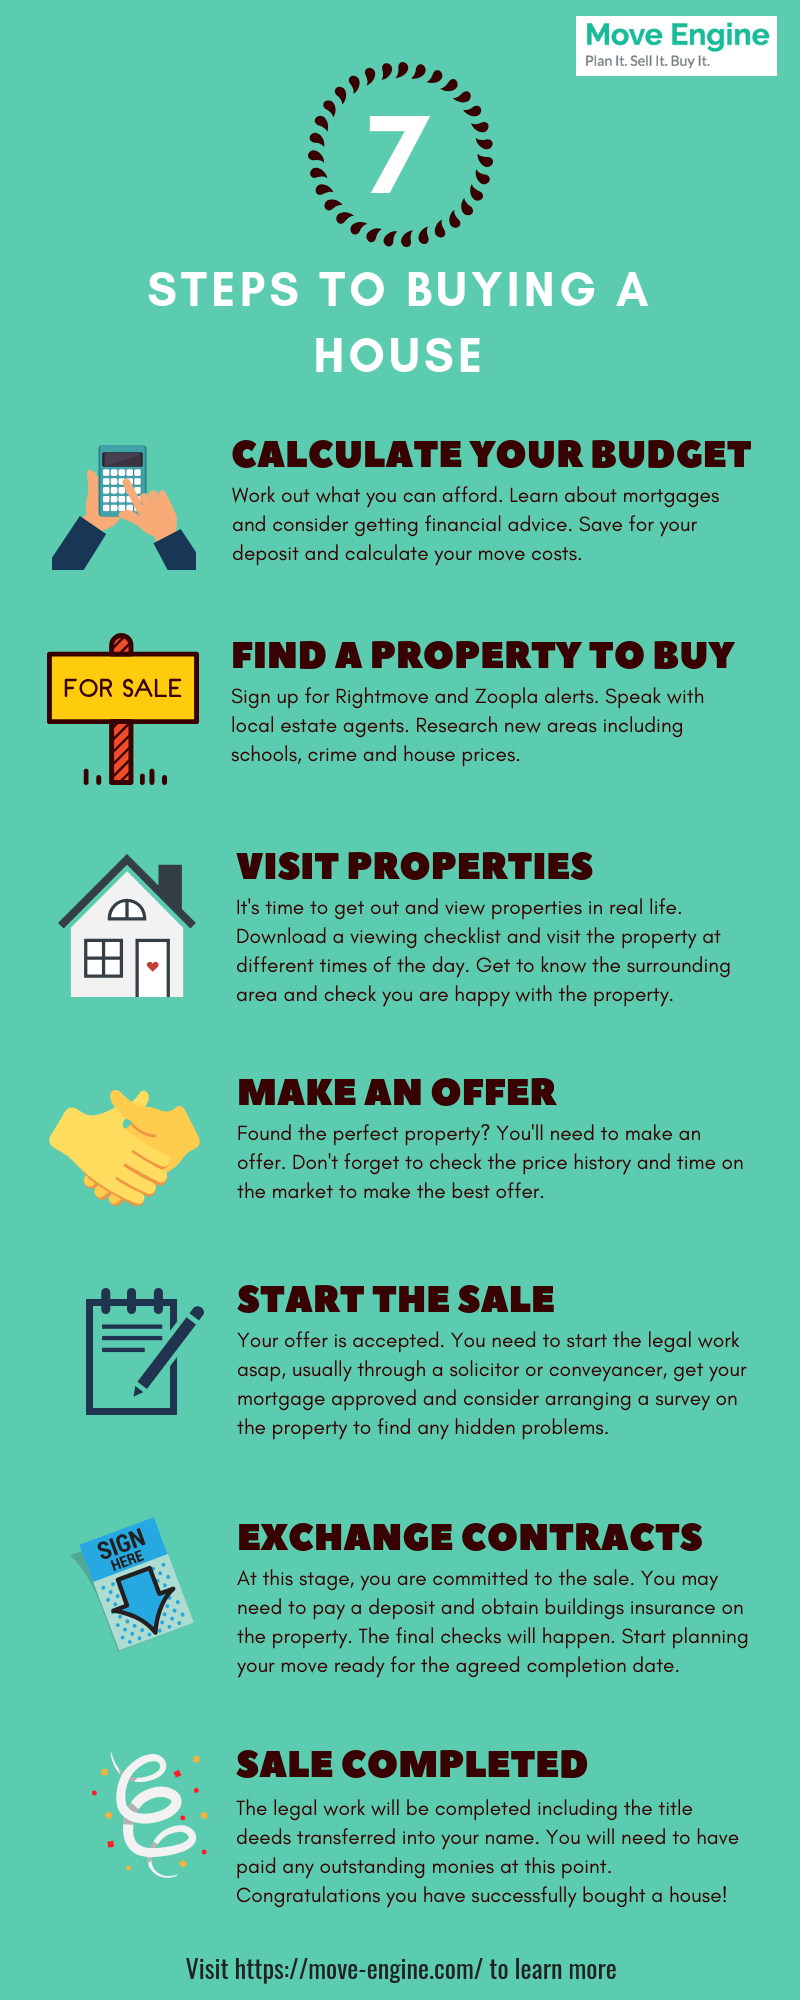 7 steps to buying a house infographic